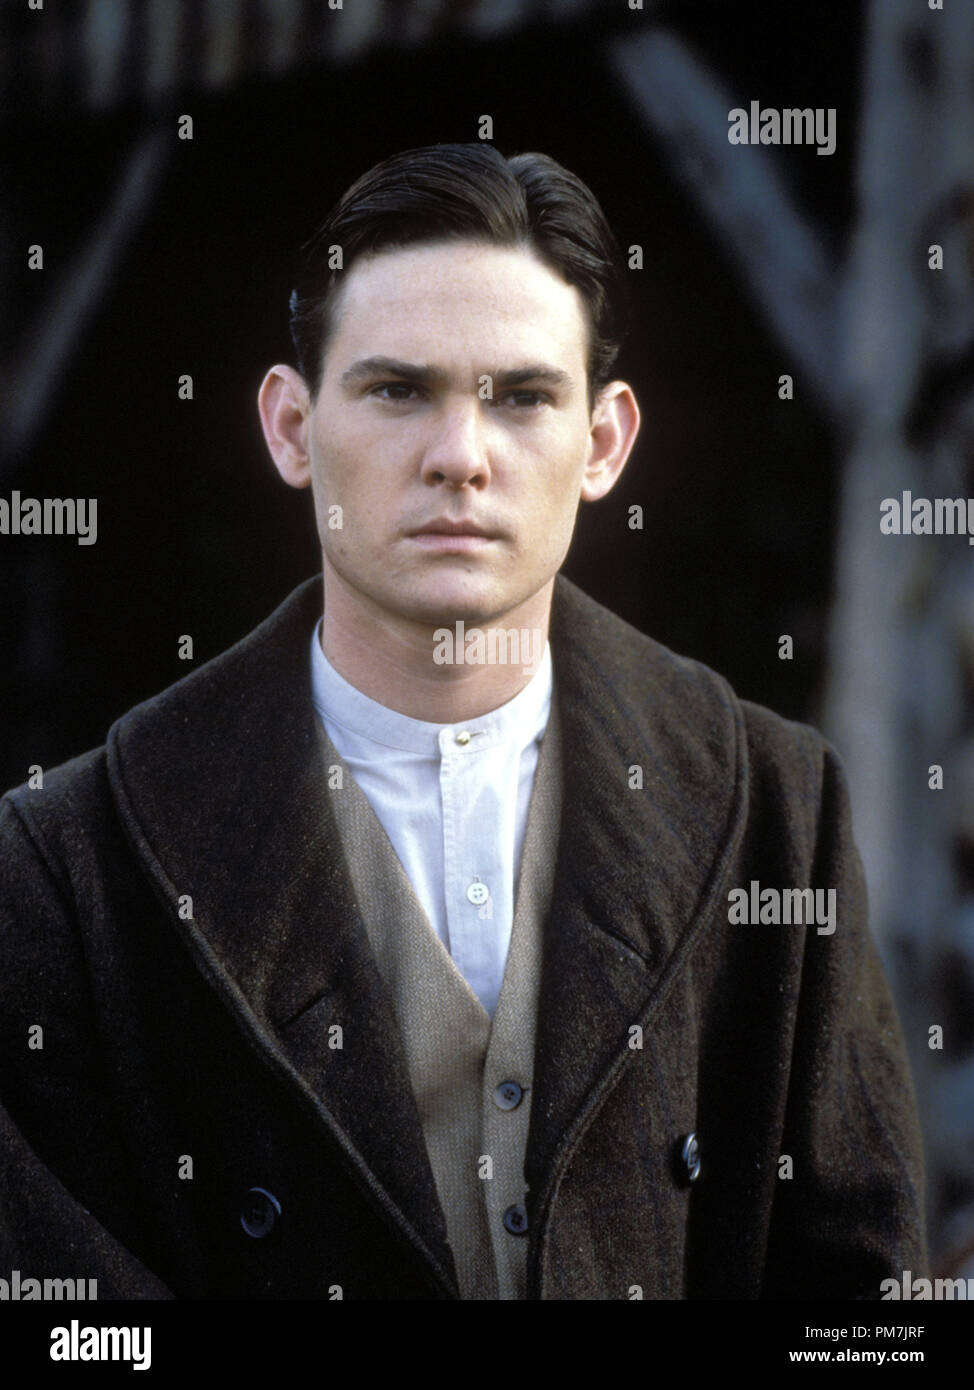 Film Still from 'Legends of the Fall' Henry Thomas © 1994 TriStar Pictures Photo Credit: Lance Staedler    File Reference # 31129287THA  For Editorial Use Only - All Rights Reserved Stock Photo